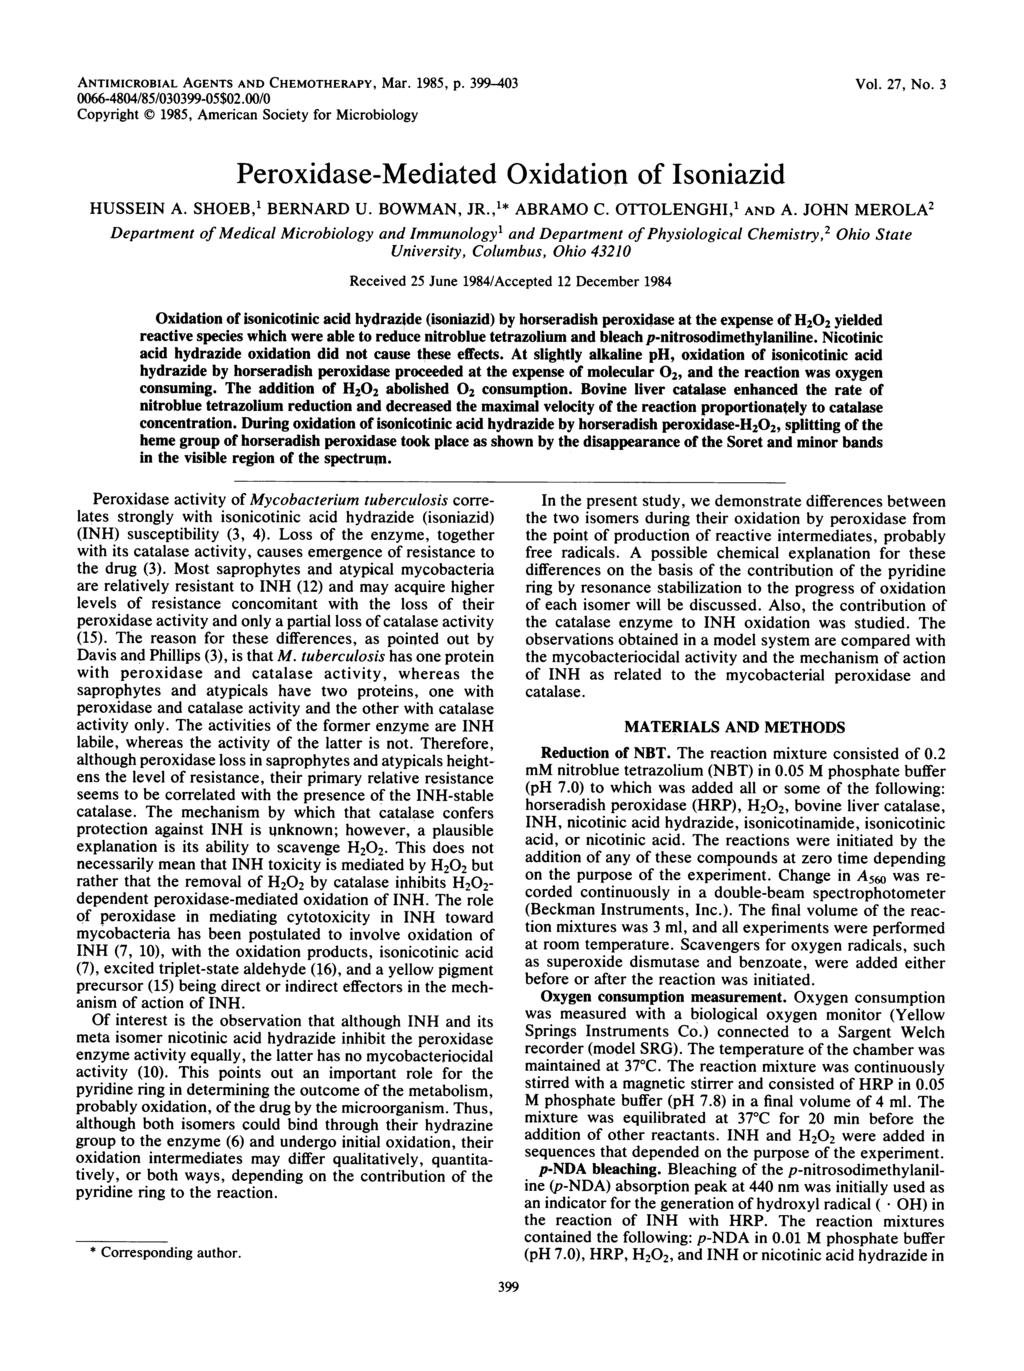 ANTMCROBAL AGENTS AND CHEMOTHERAPY, Mar. 1985, p. 399-43 66-484/85/3399-5$2./ Copyright 1985, American Society for Microbiology Vol. 27, No. 3 Peroxidase-Mediated Oxidation of soniazid HUSSEN A.